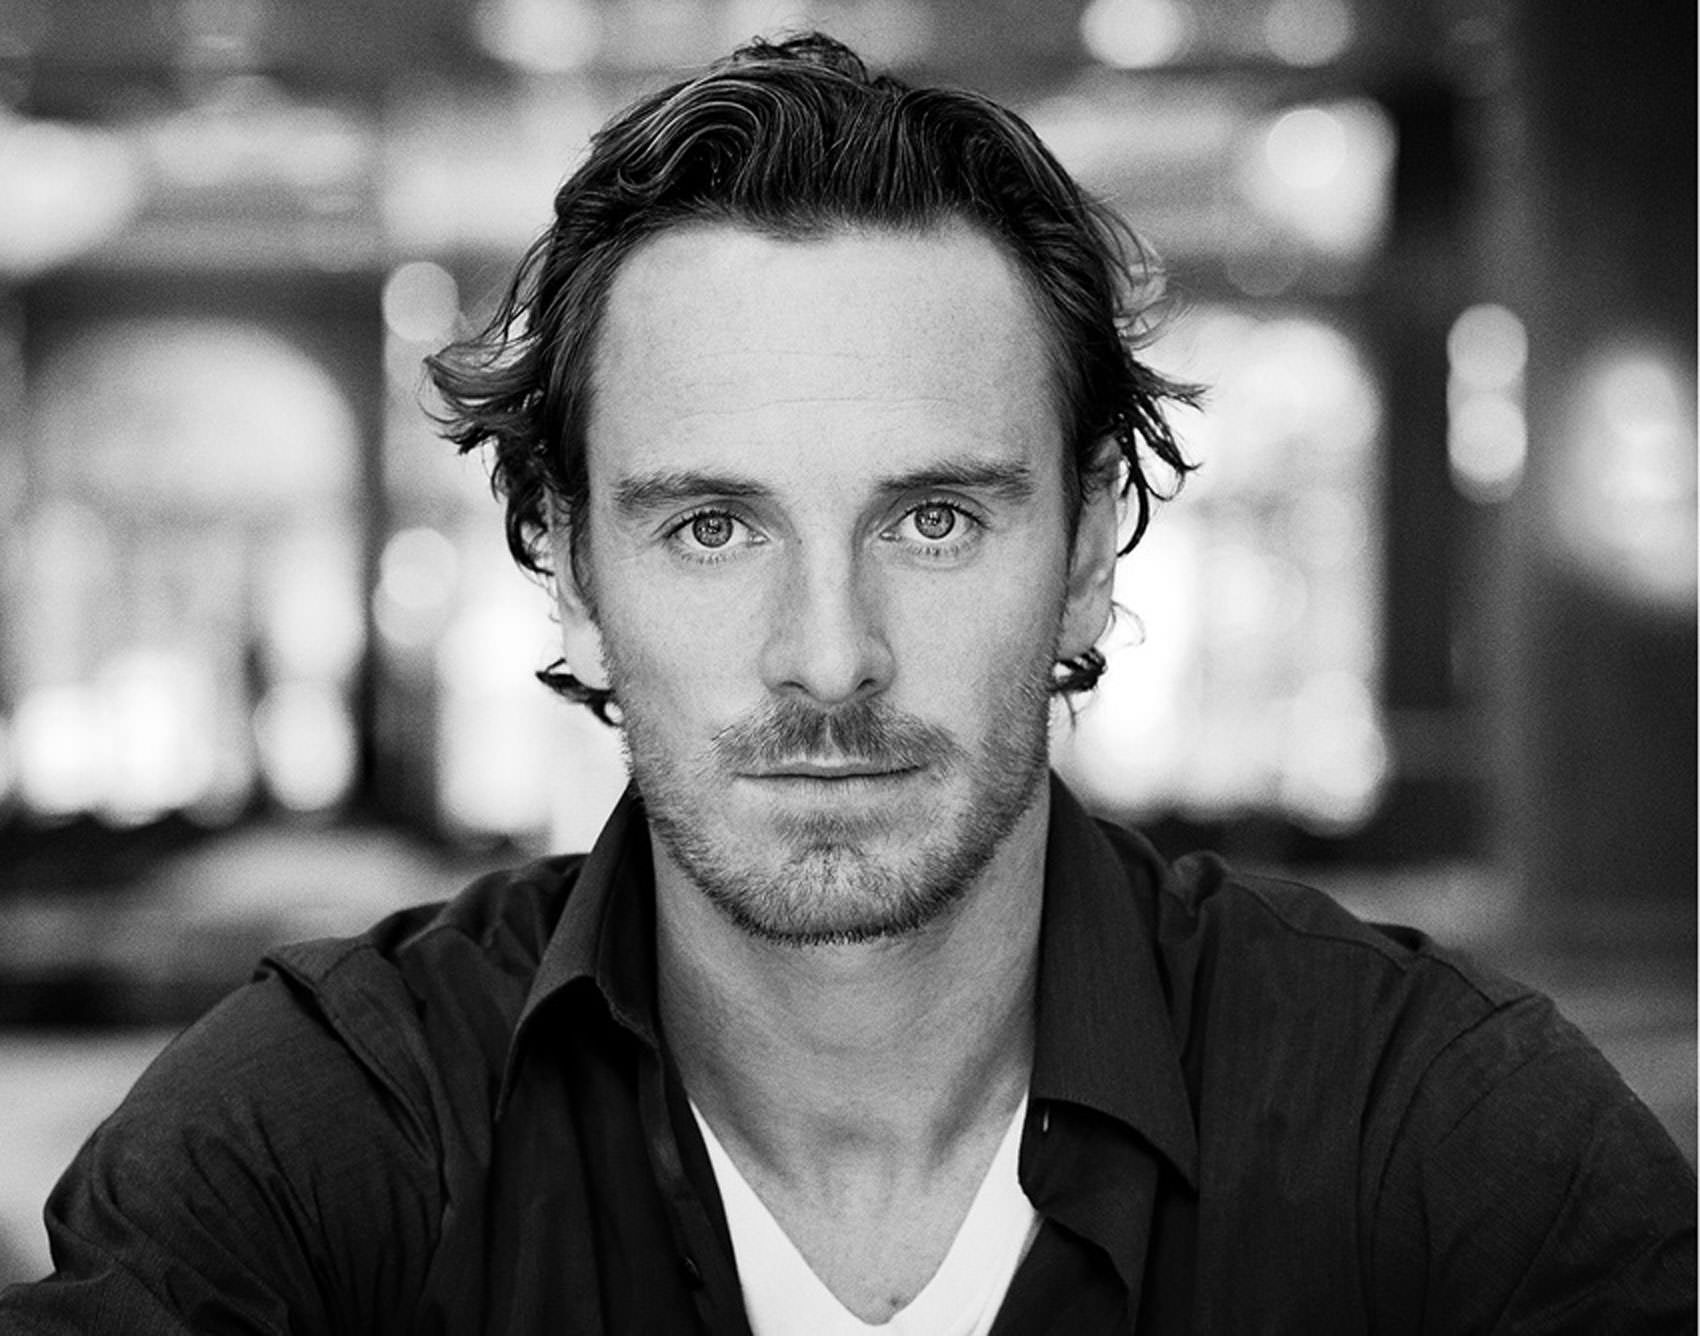 michael-michael-fassbender-28620024-1700-1336-michael-fassbender-may-replace-christian-bale-in-steve-jobs-role